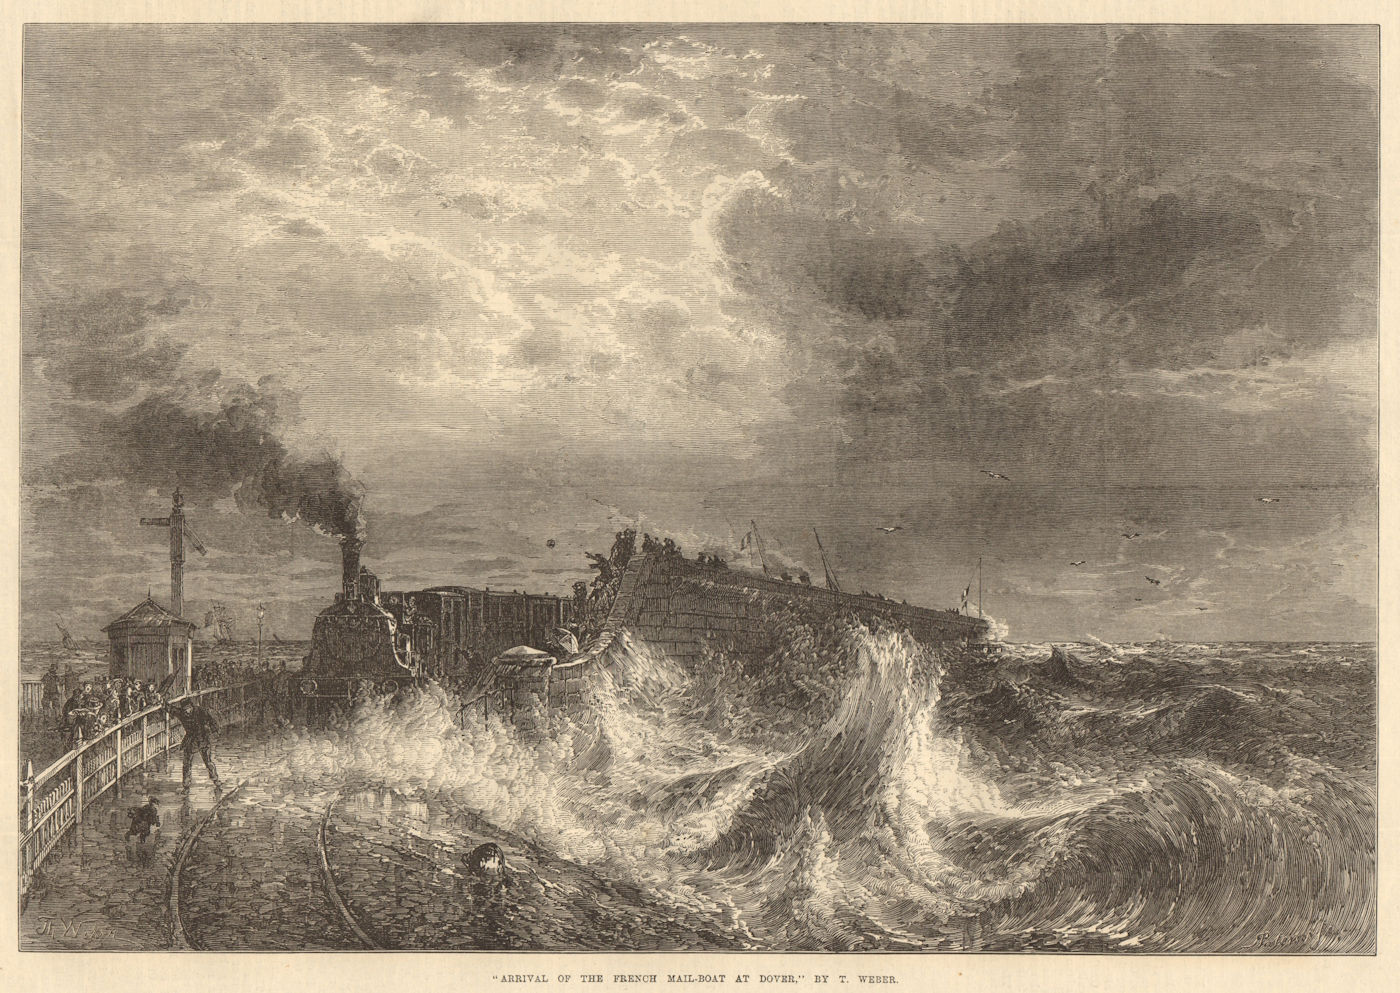 Associate Product "Arrival of the French mail-boat at Dover", by T. Weber. Kent. Railways 1871